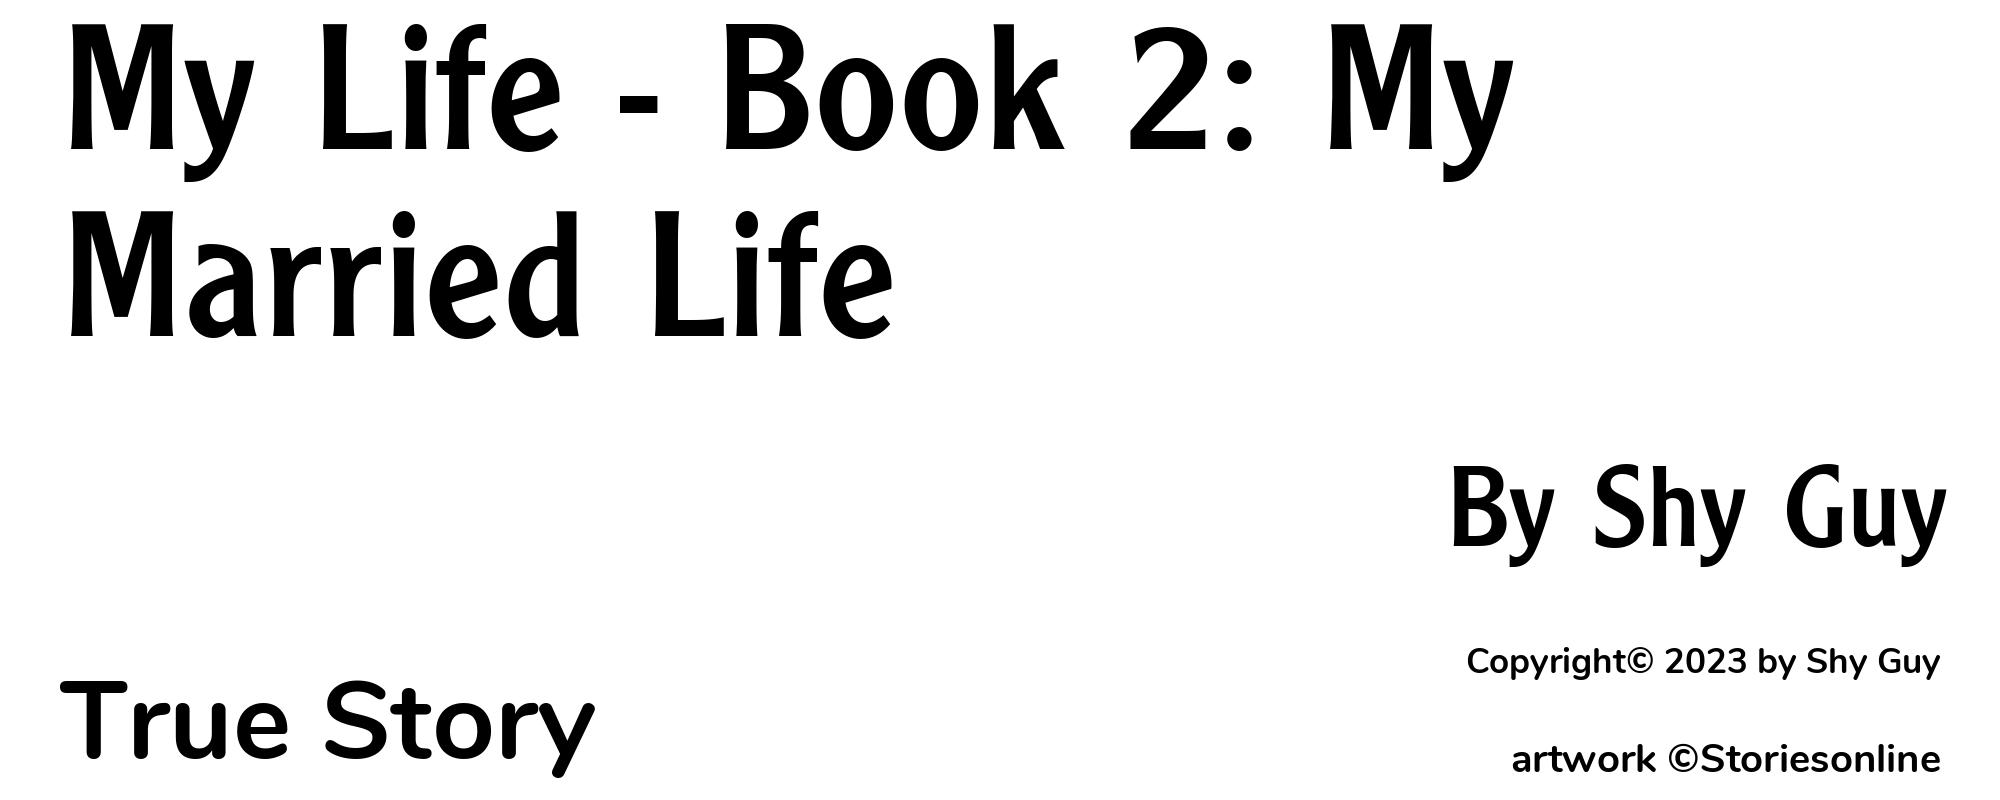 My Life - Book 2: My Married Life - Cover